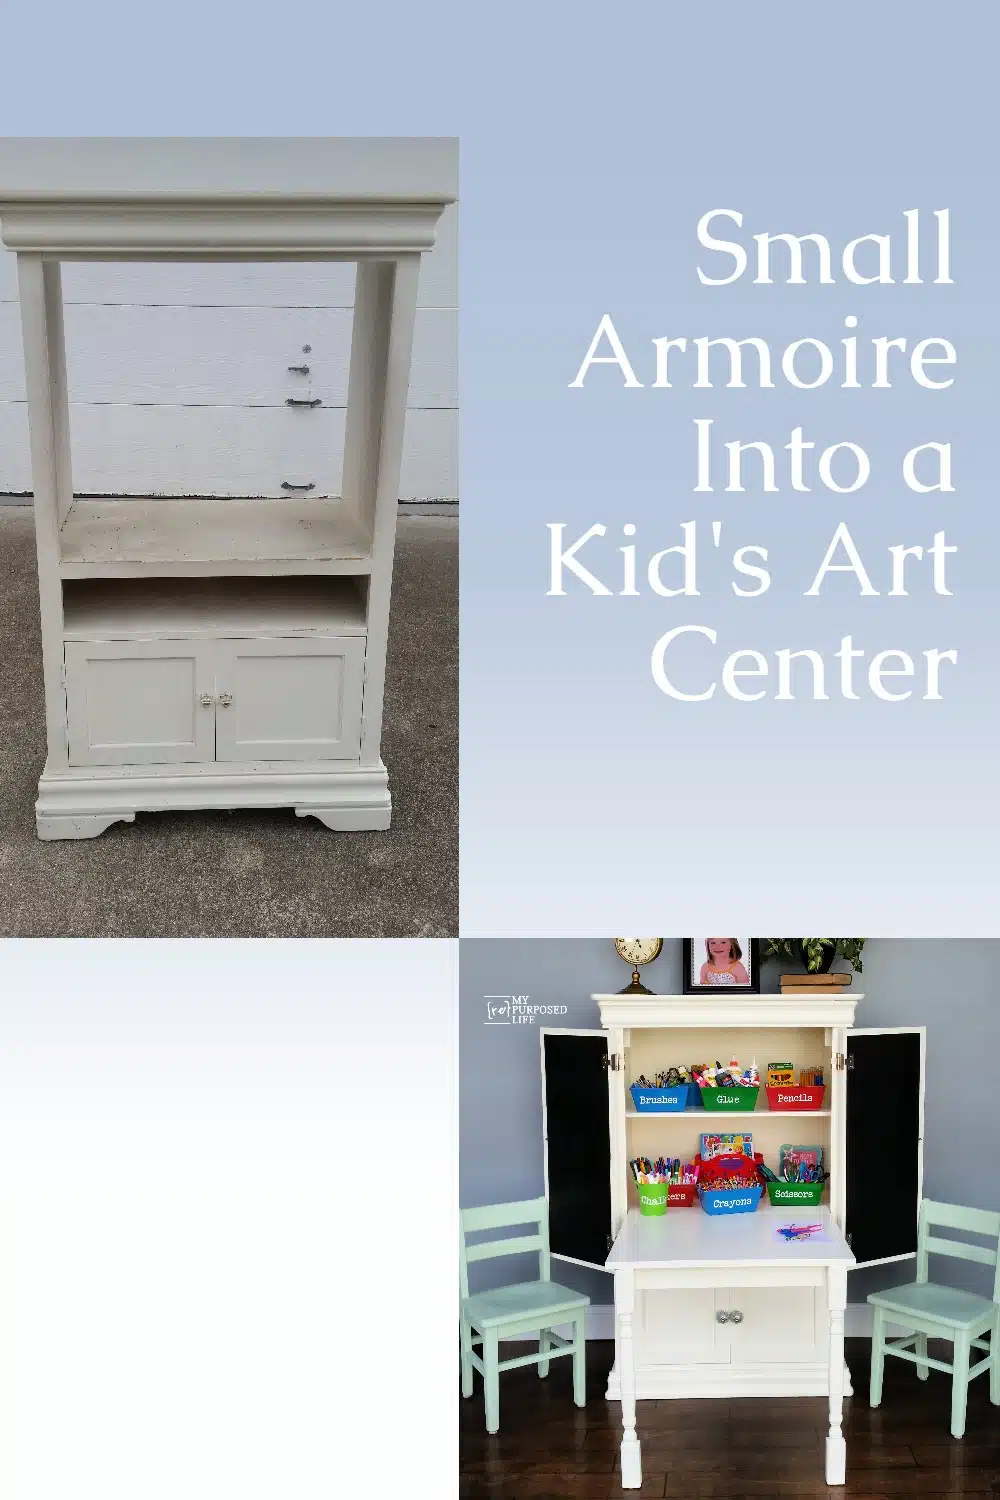 How to make a kids art desk out of an old armoire. This art desk has a unique fold down desk with lots of storage for all the needed art supplies. #myrepurposedlife #repurposed #armoire #furniture #kids #desk #artcenter via @repurposedlife